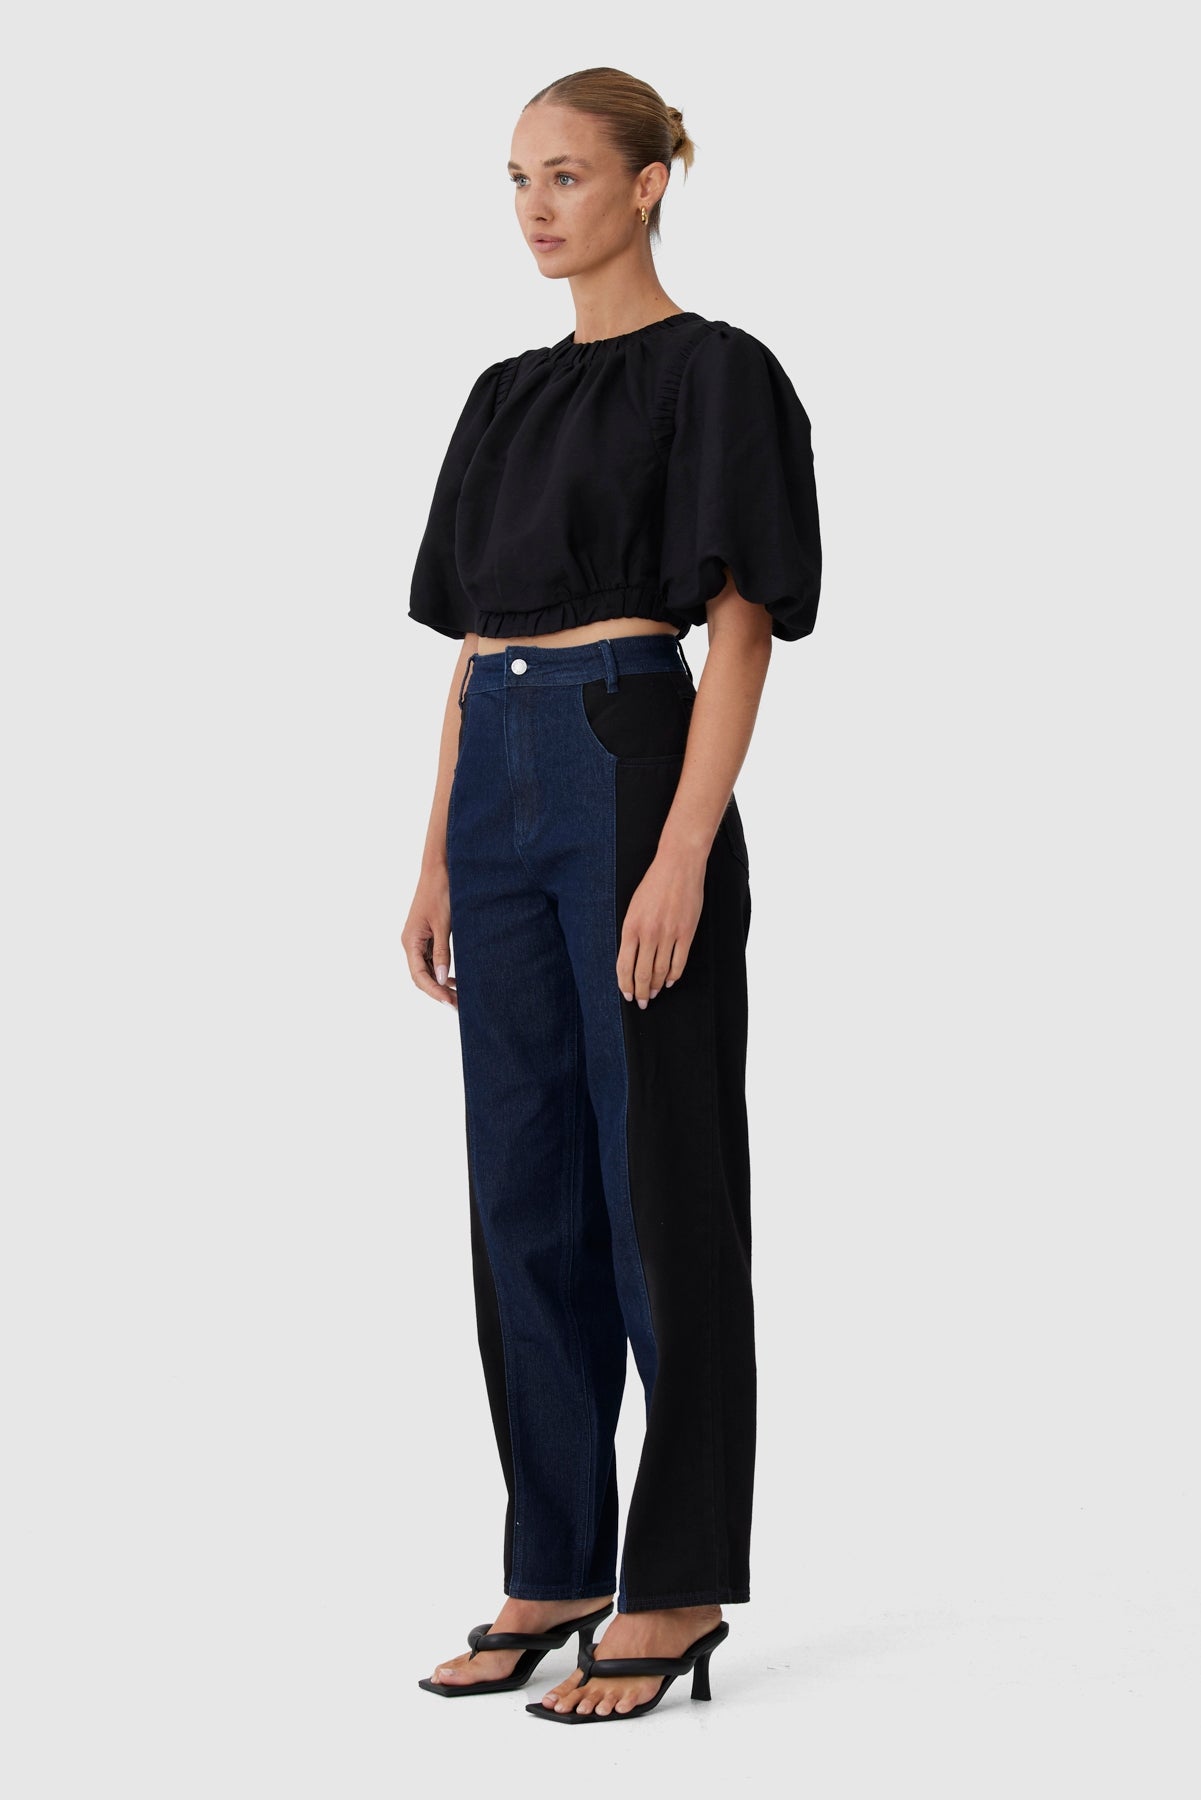 C/MEO Collective - Now And Forever Top - Black